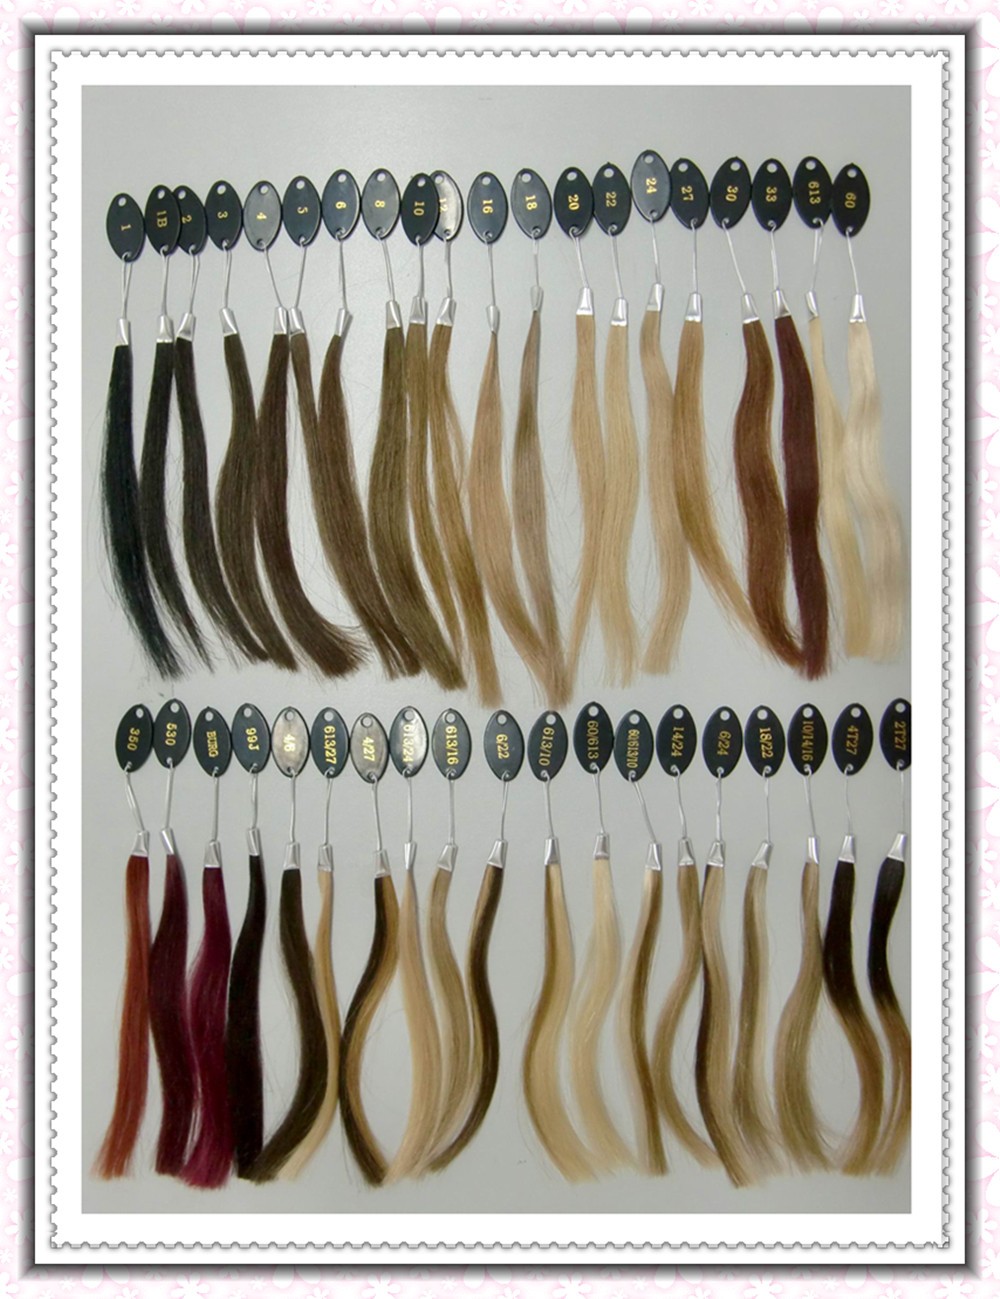 Top Quality Virgin Brazilian Hair 100% Remy Human Tape Hair Extensions Double Drawn 15